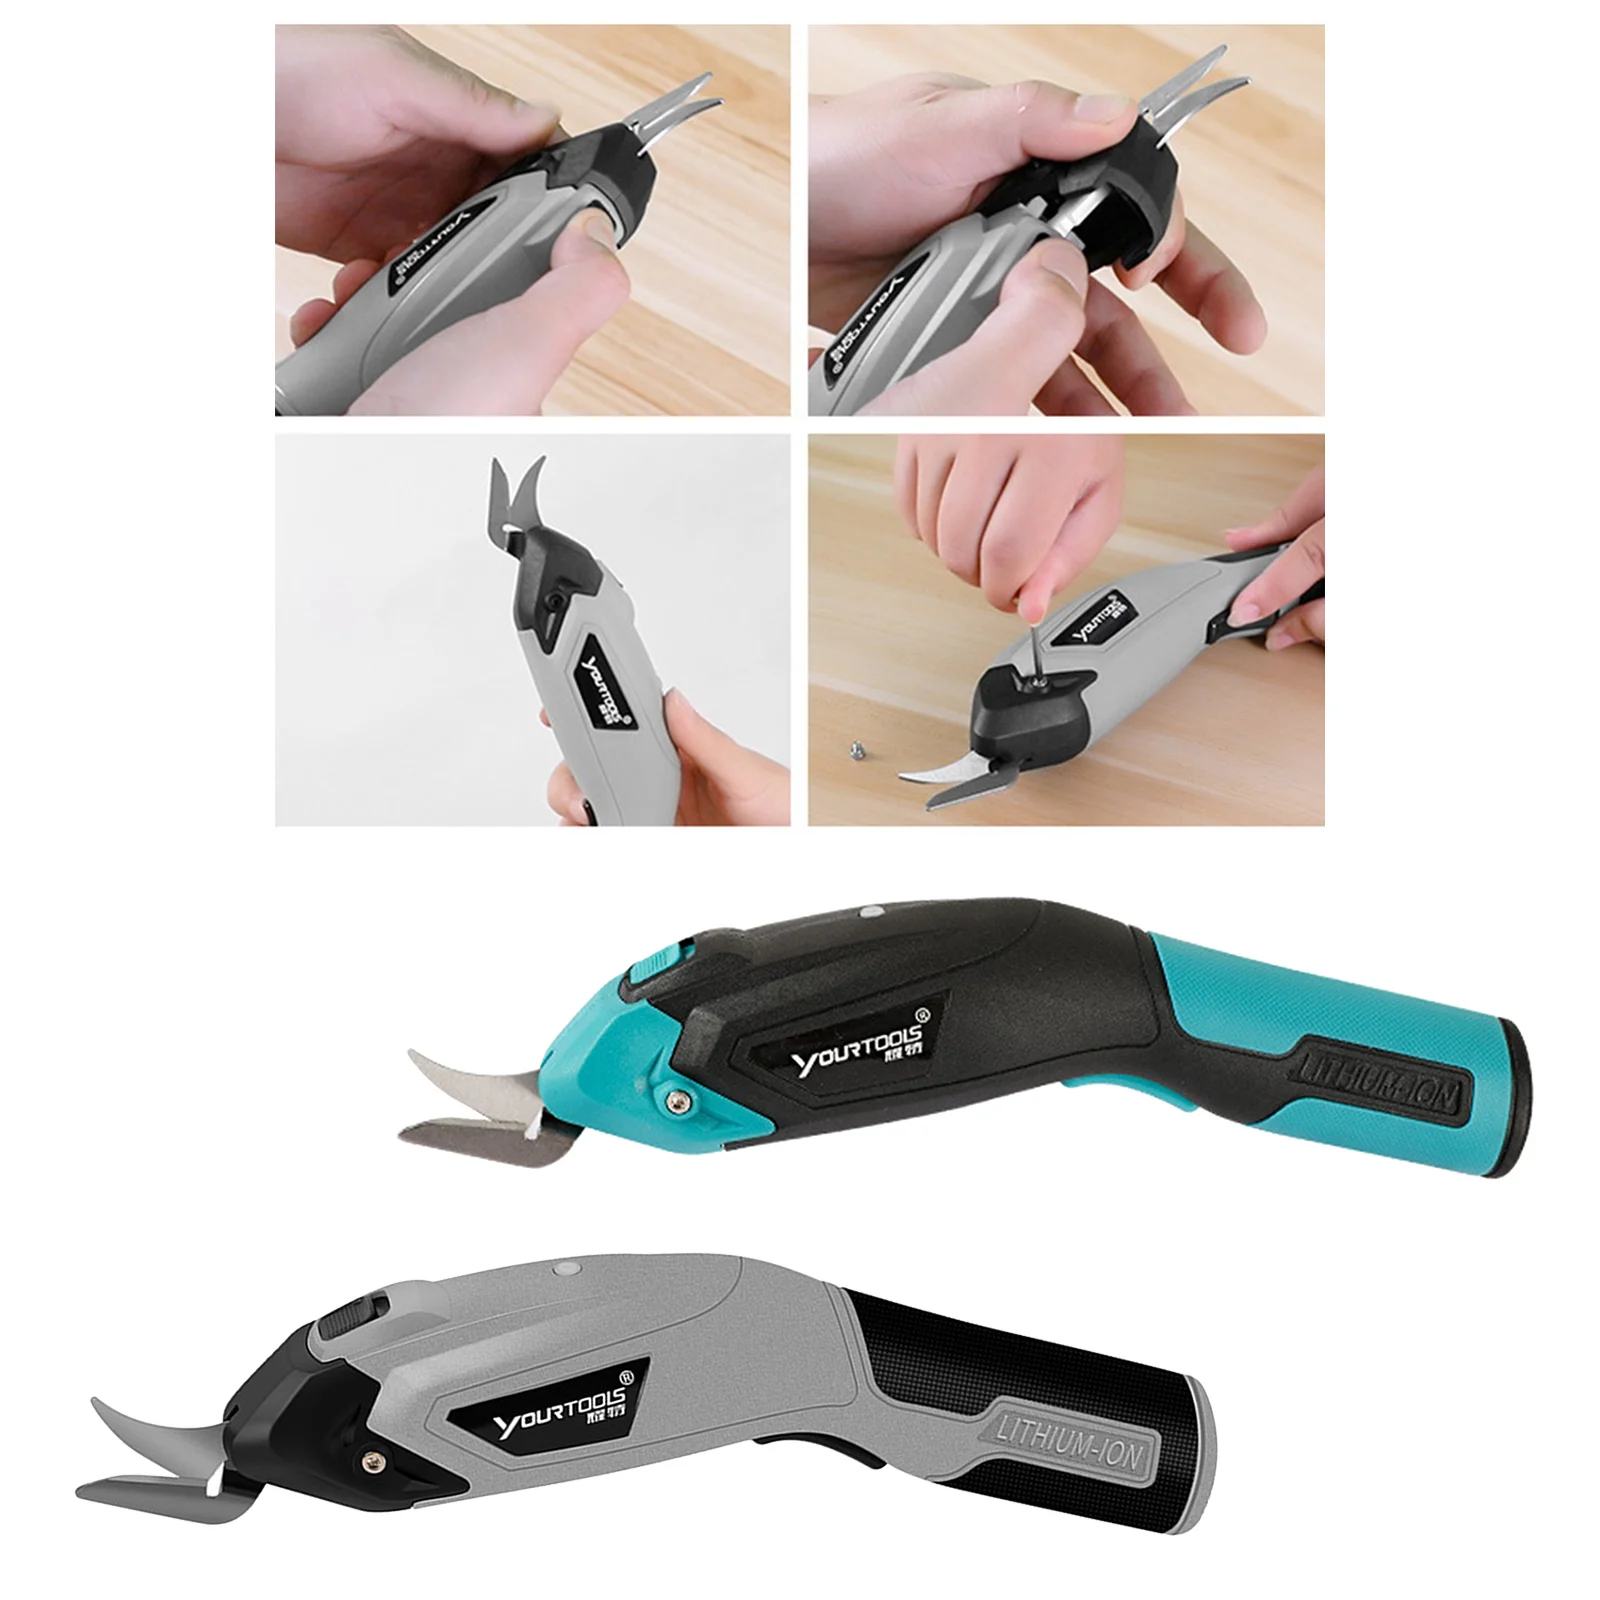 Portable Electric Scissors USB Rechargeable Box Cutter for Leather Crafts Cardboard Shears Carpet Cutting Tool